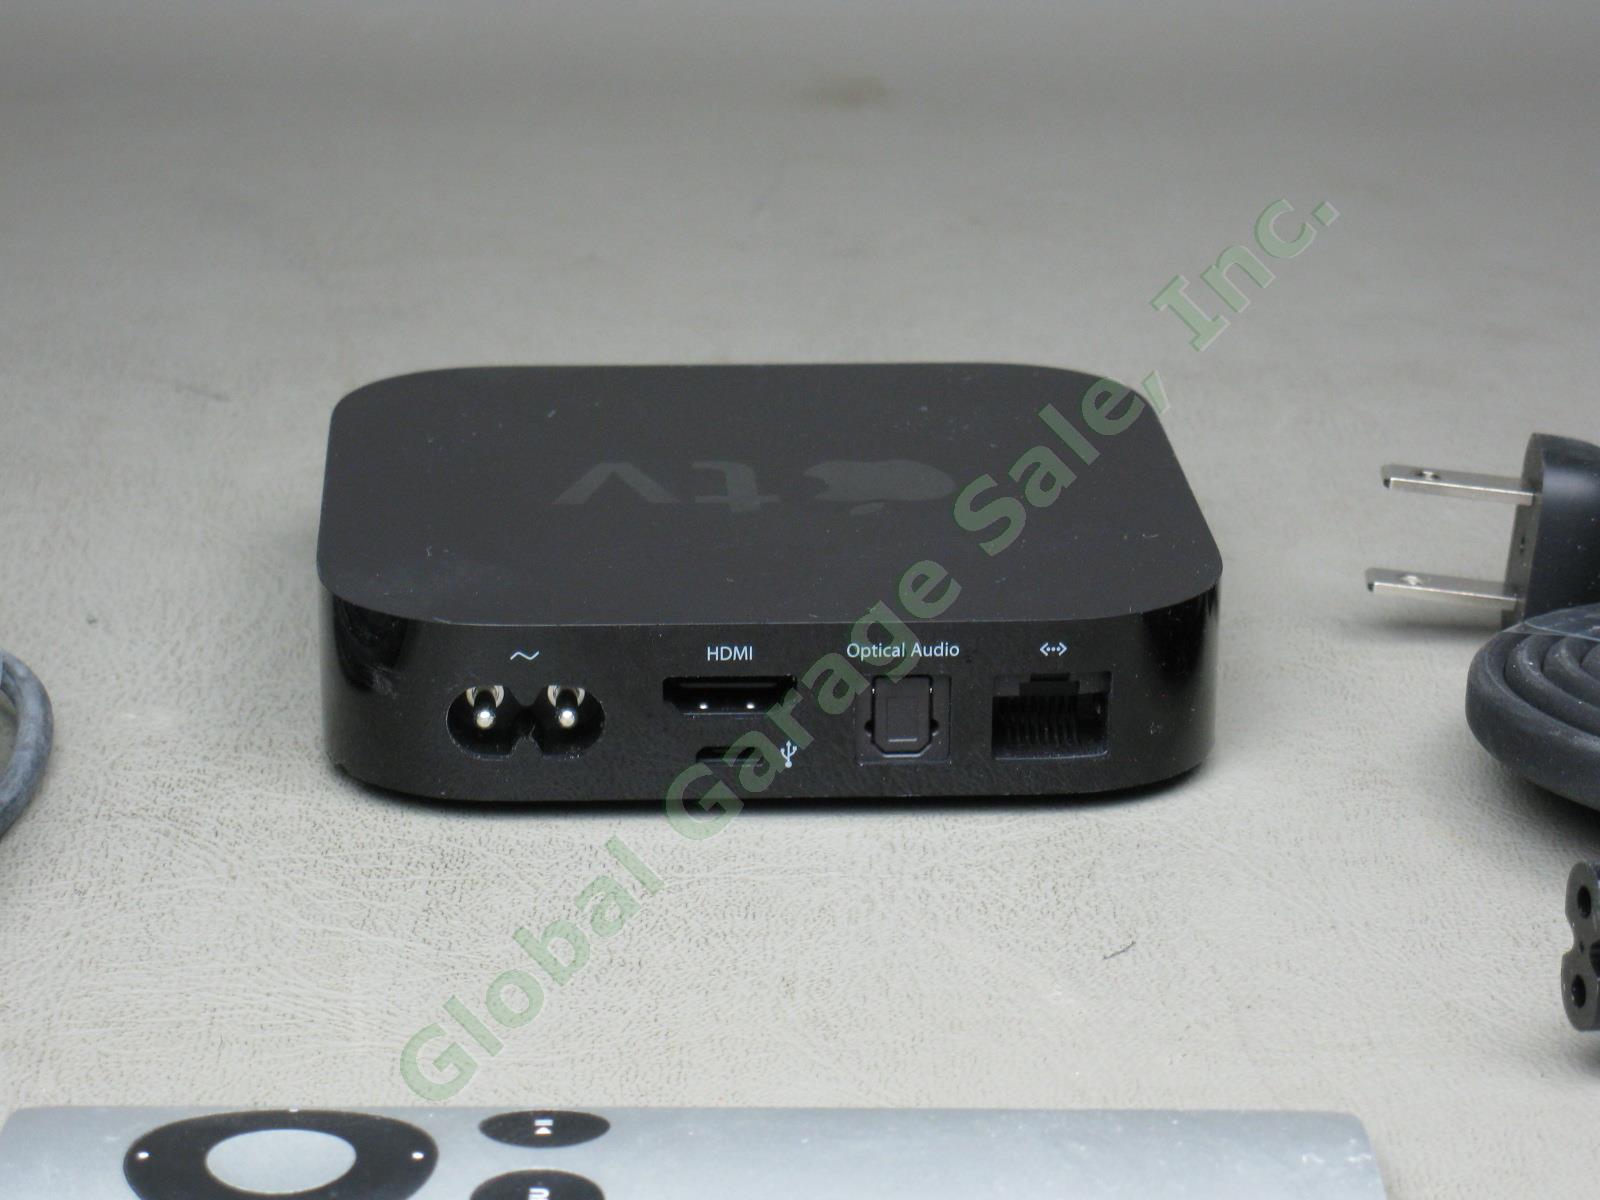 Apple TV 1080p 3rd Gen Generation A1427 MD199LL/A One Owner Box Remote HDMI NR! 1